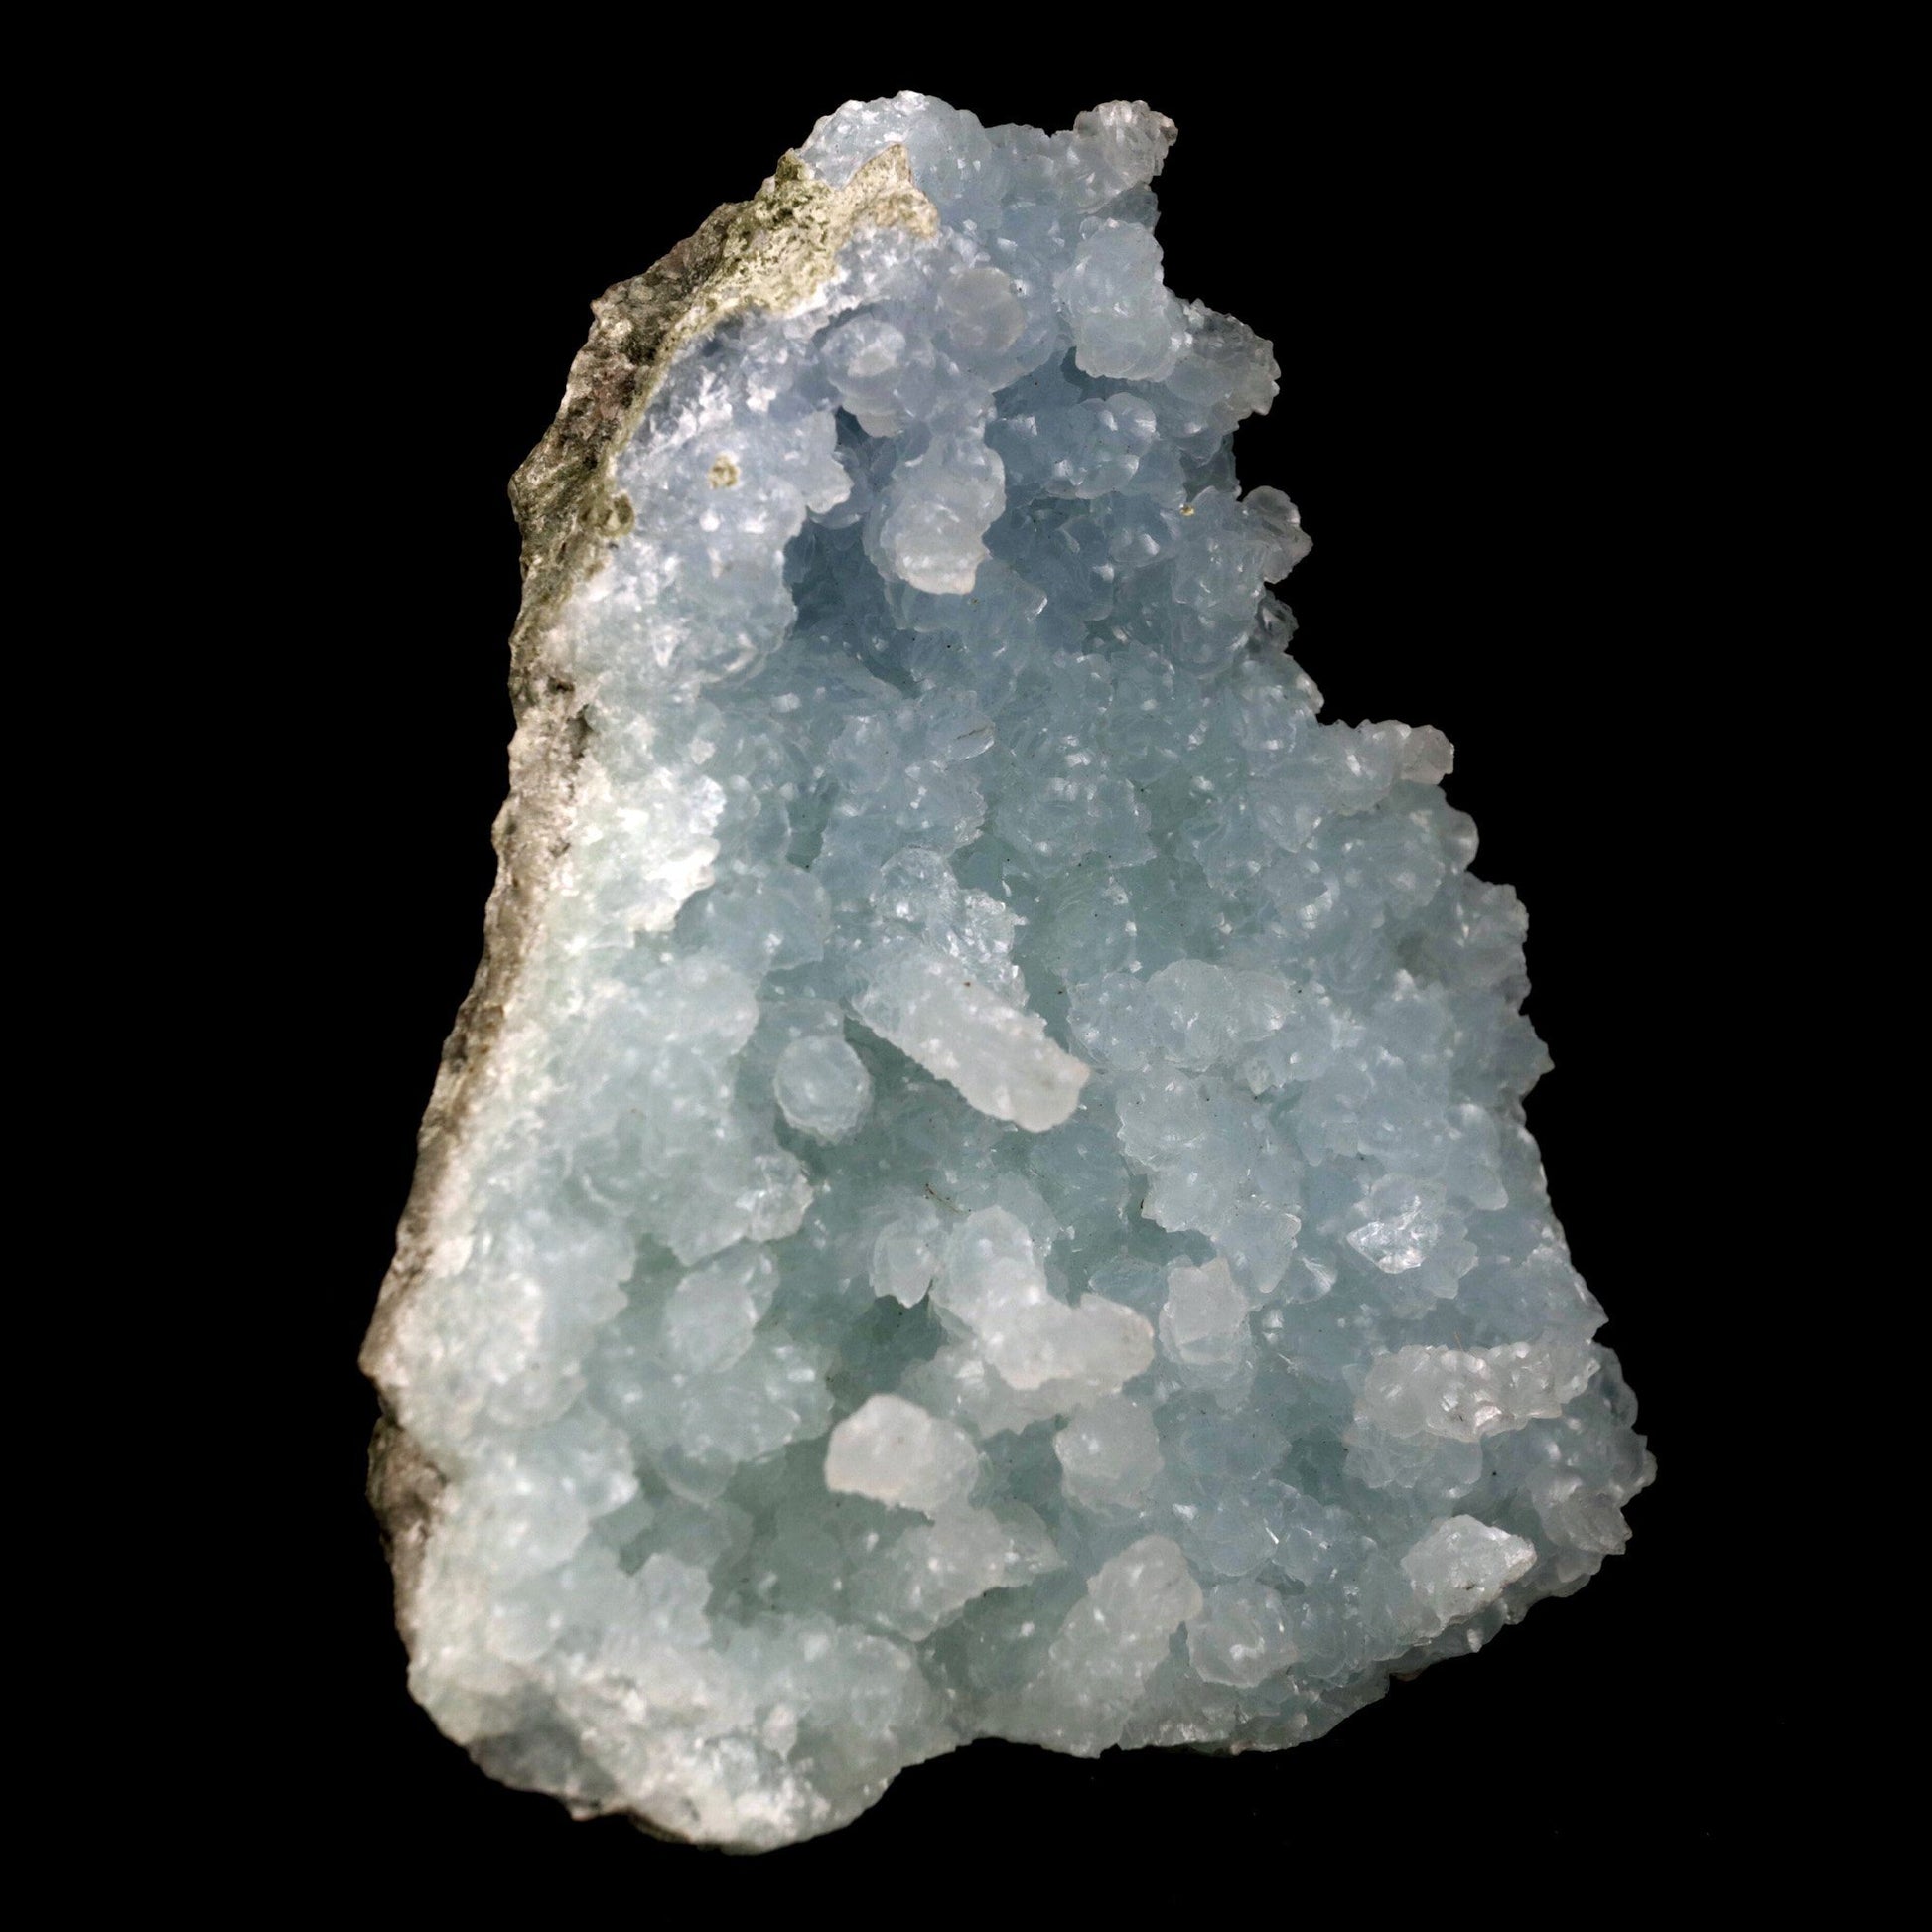 Prehnite Stalactite on Cluster Natural Mineral Specimen # B 4920  https://www.superbminerals.us/products/prehnite-stalactite-on-cluster-natural-mineral-specimen-b-4920  Features: A rare jackstraw cluster of elongated laumontite crystals that pseudomorphed from translucent mint-green prehnite crystals.Malad Quarry in Mumbai is well-known for its old material that is both traditional and remarkable.